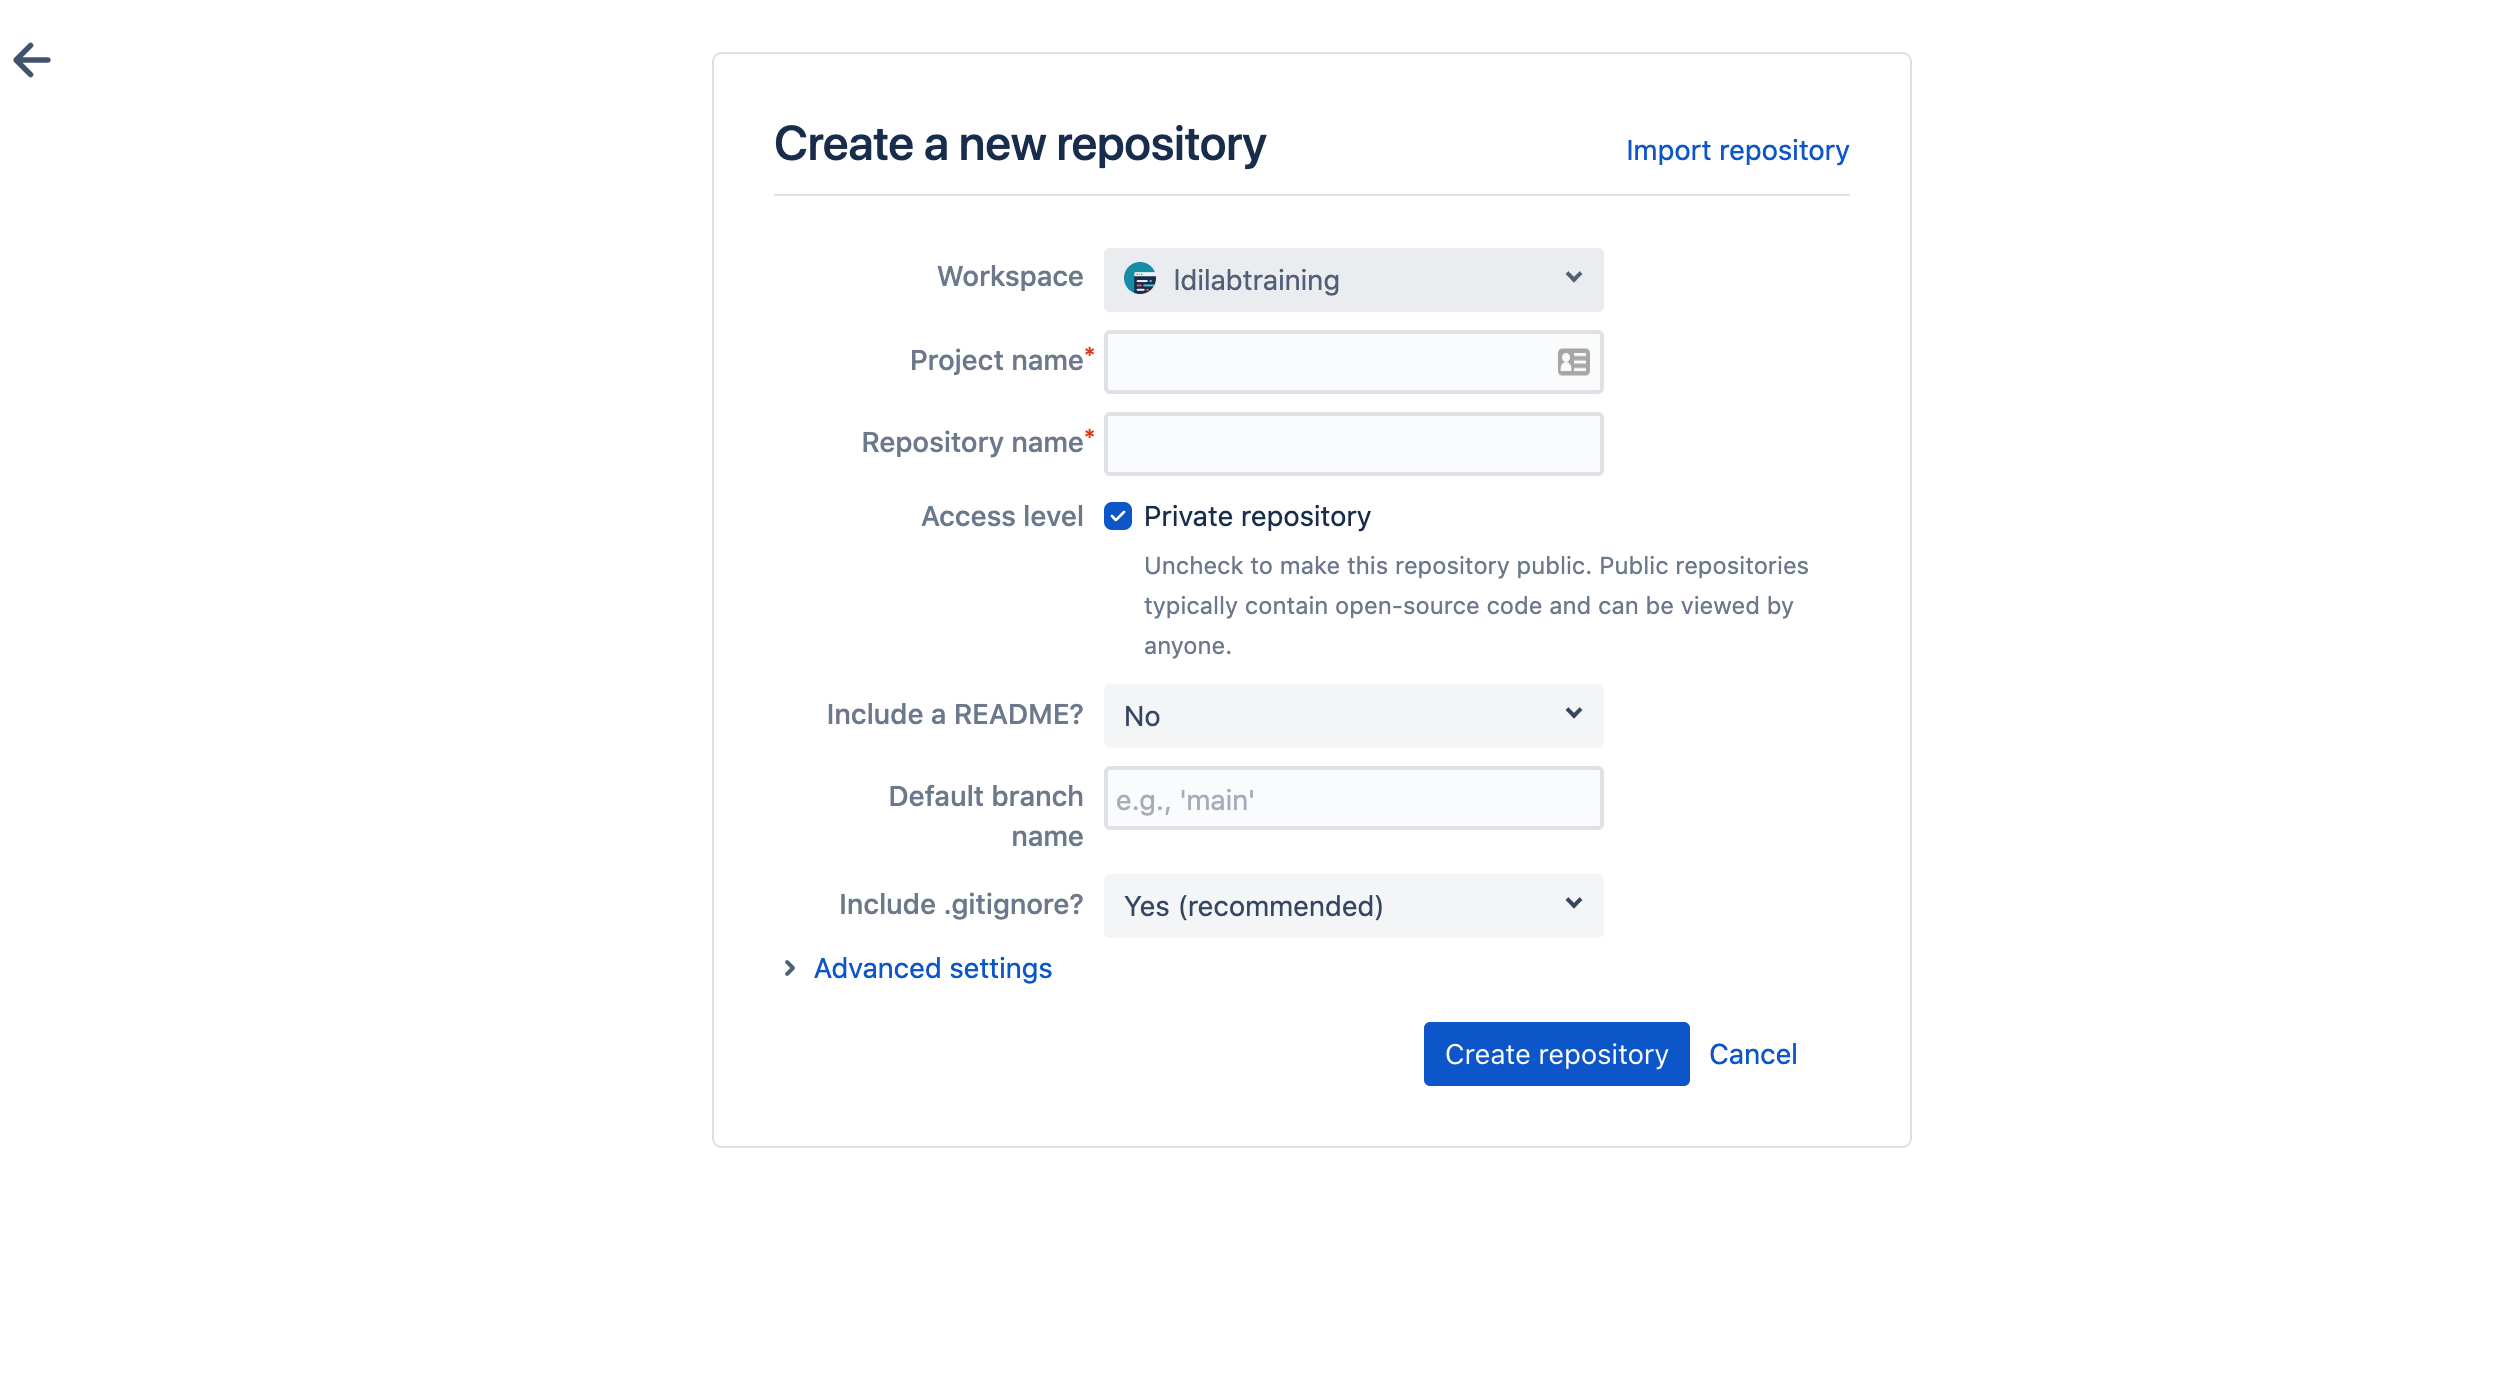 Creating a Repository on Bitbucket (Step 3)